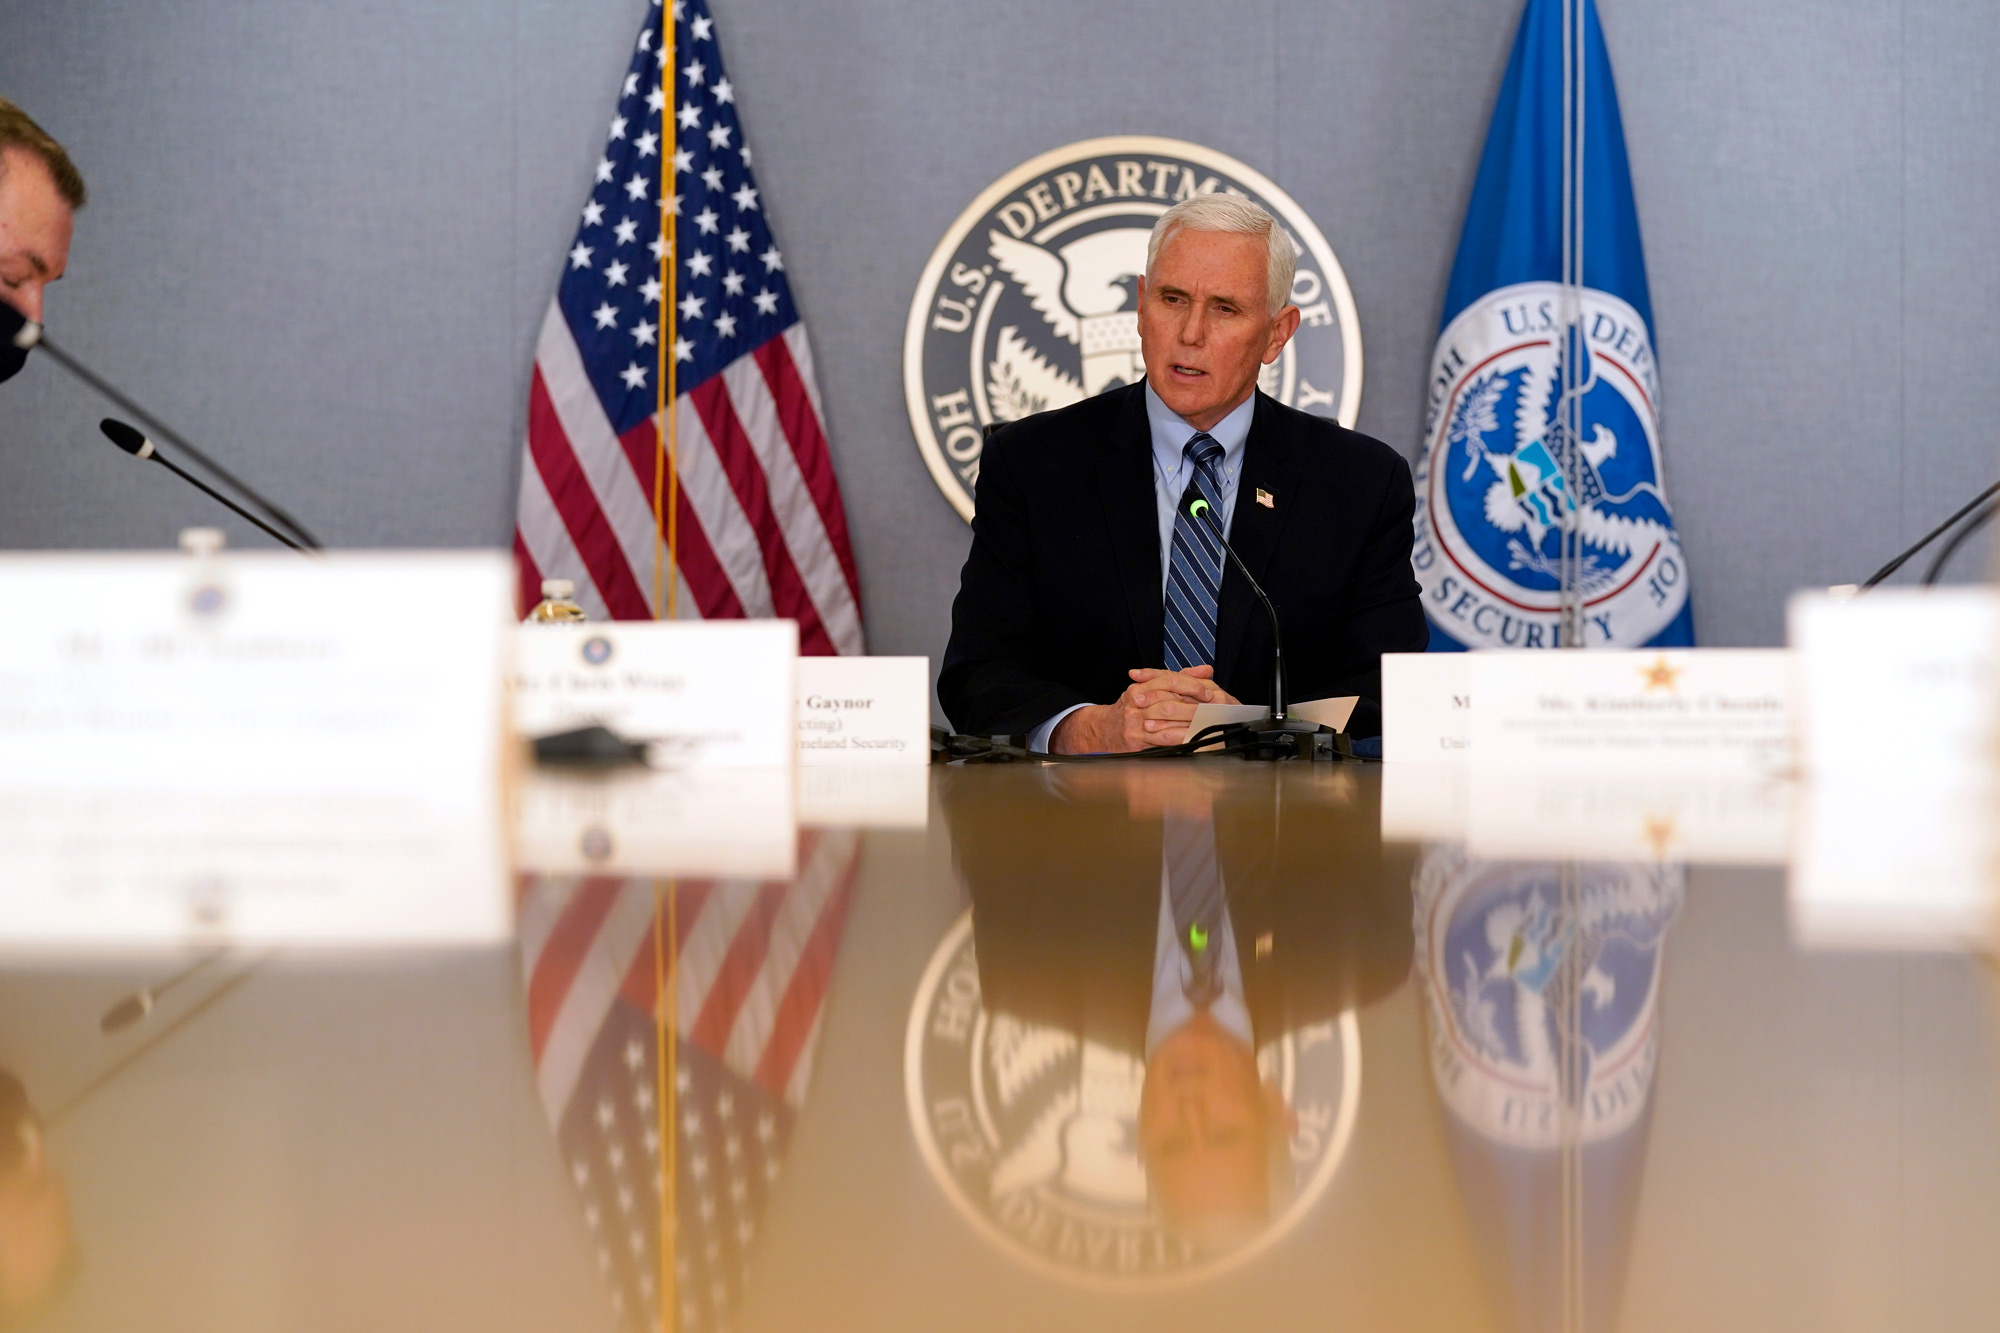 Vice President Mike Pence speaks during a briefing about the upcoming presidential inauguration of President-elect Joe Biden and Vice President-elect Kamala Harris at FEMA headquarters on January 14 in Washington, DC.